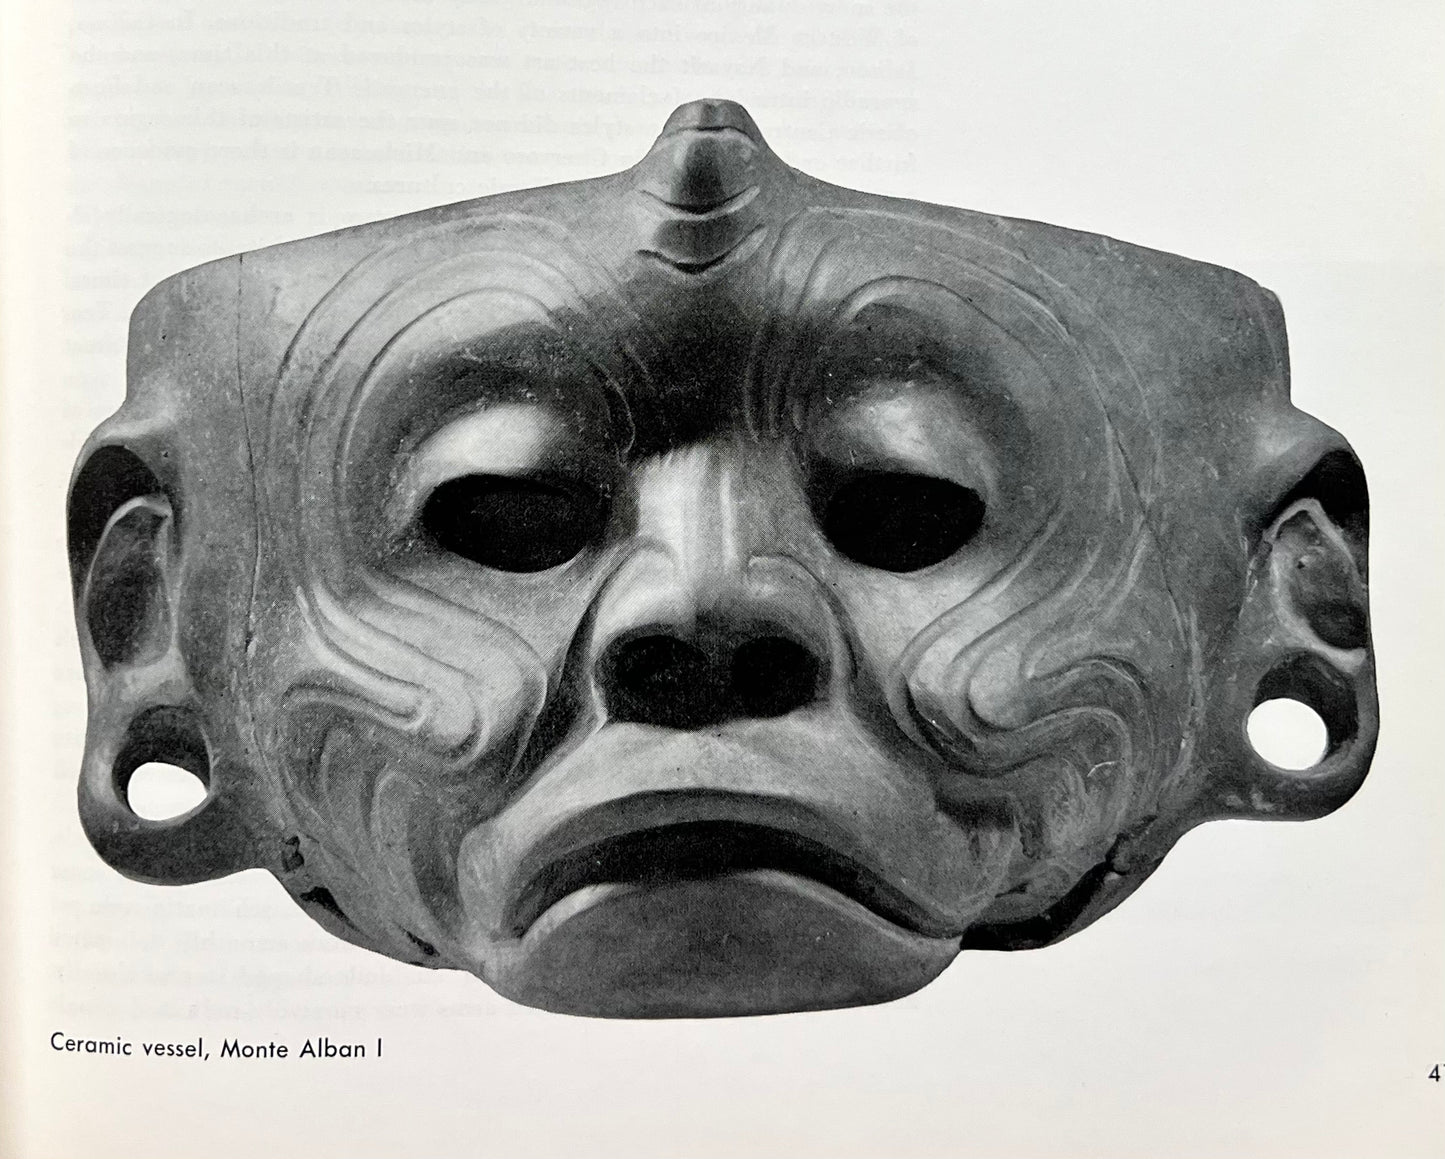 The Ancient Art of the Americas